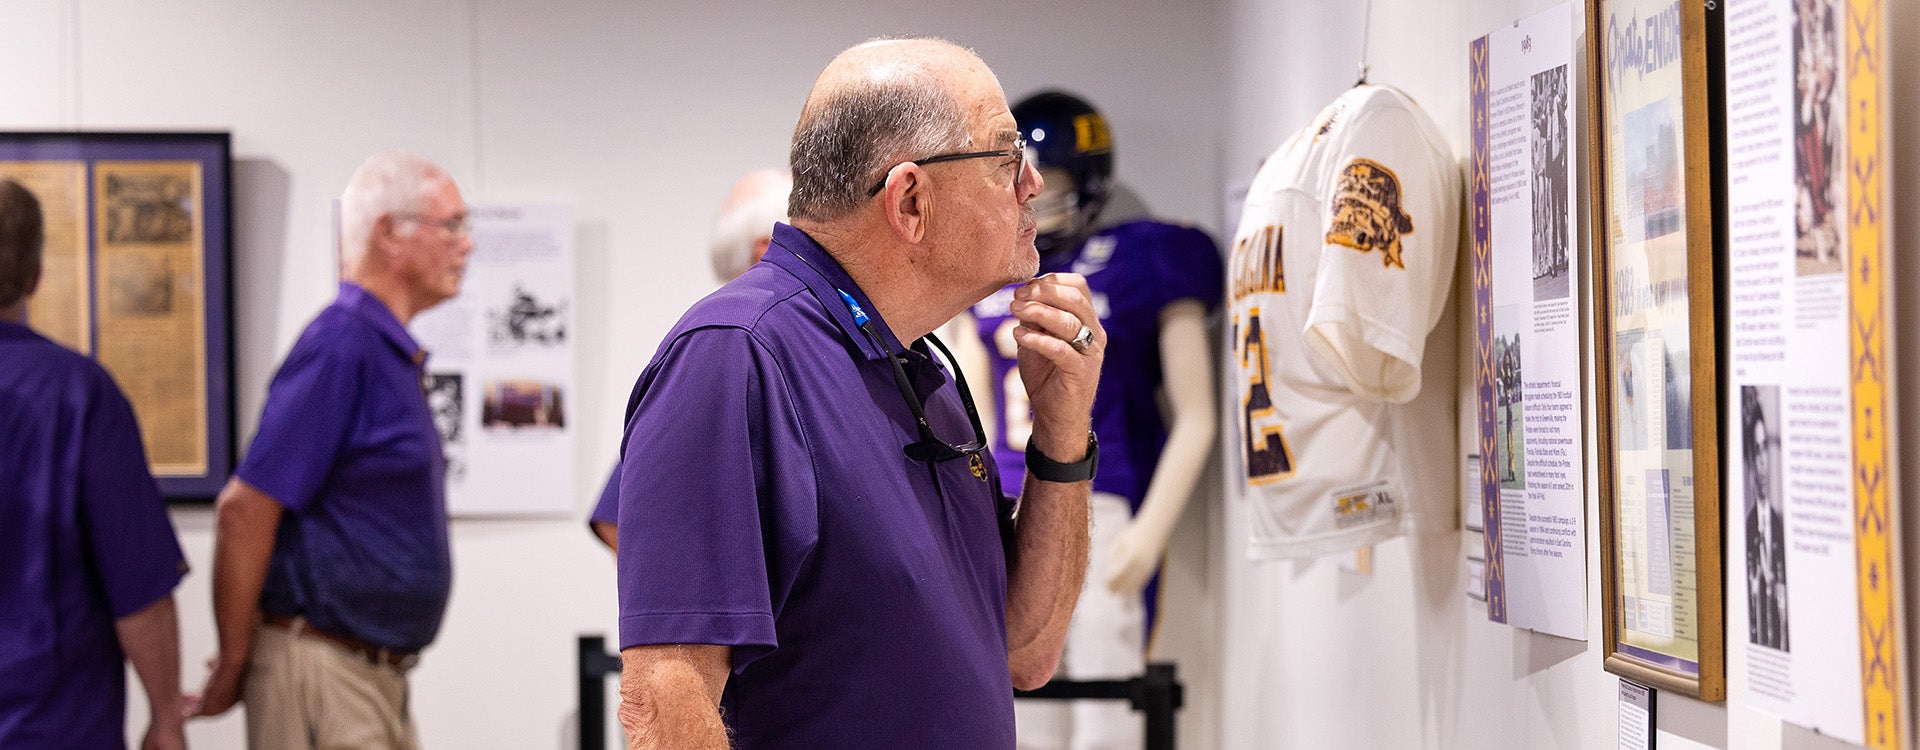 Ted Salmon, one of the 1970 East Carolina football players, looks at a panel in the “No Quarter: The History of East Carolina Football and Dowdy-Ficklen Stadium” exhibit.